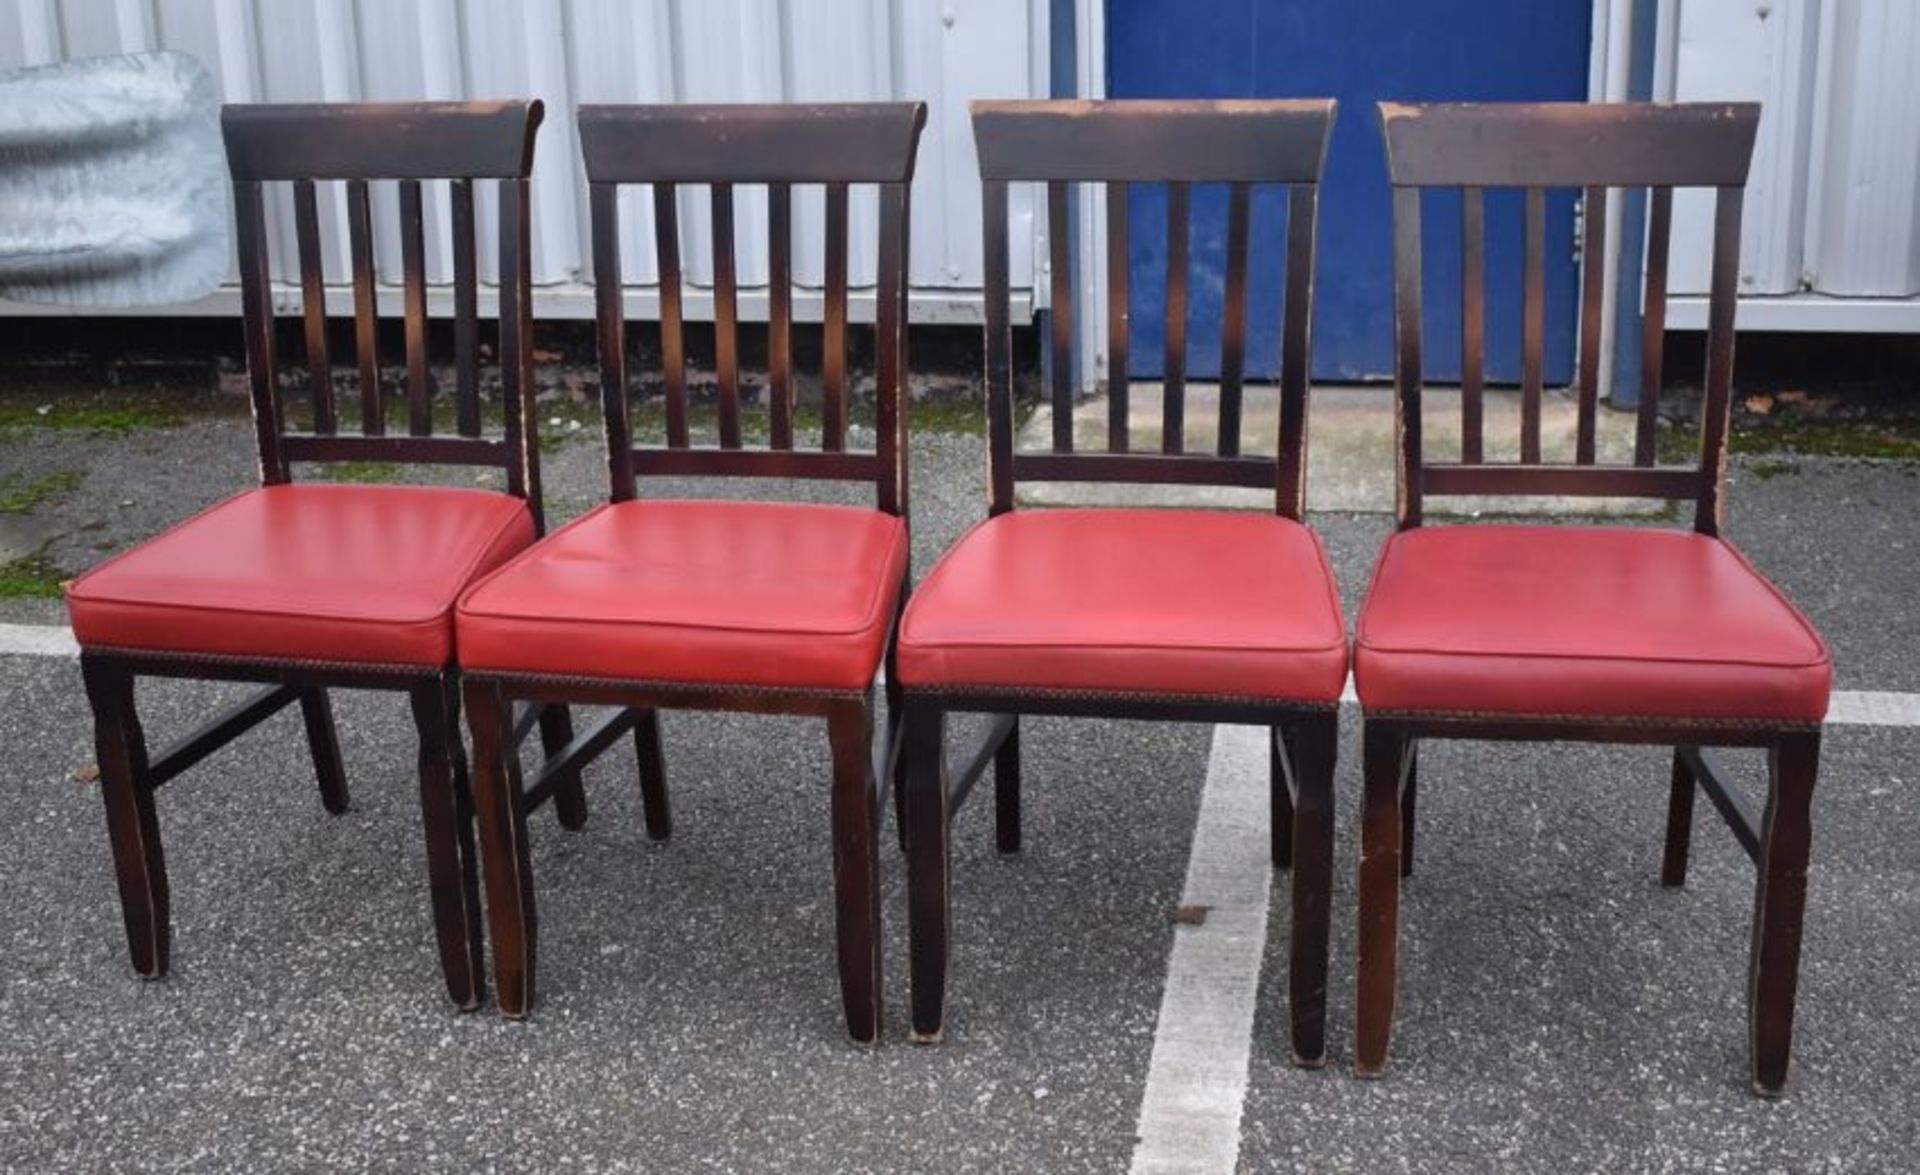 16 x Restaurant Dining Chairs With Dark Stained Wood Finish and Red Leather Seat Pads - Recently - Image 3 of 7